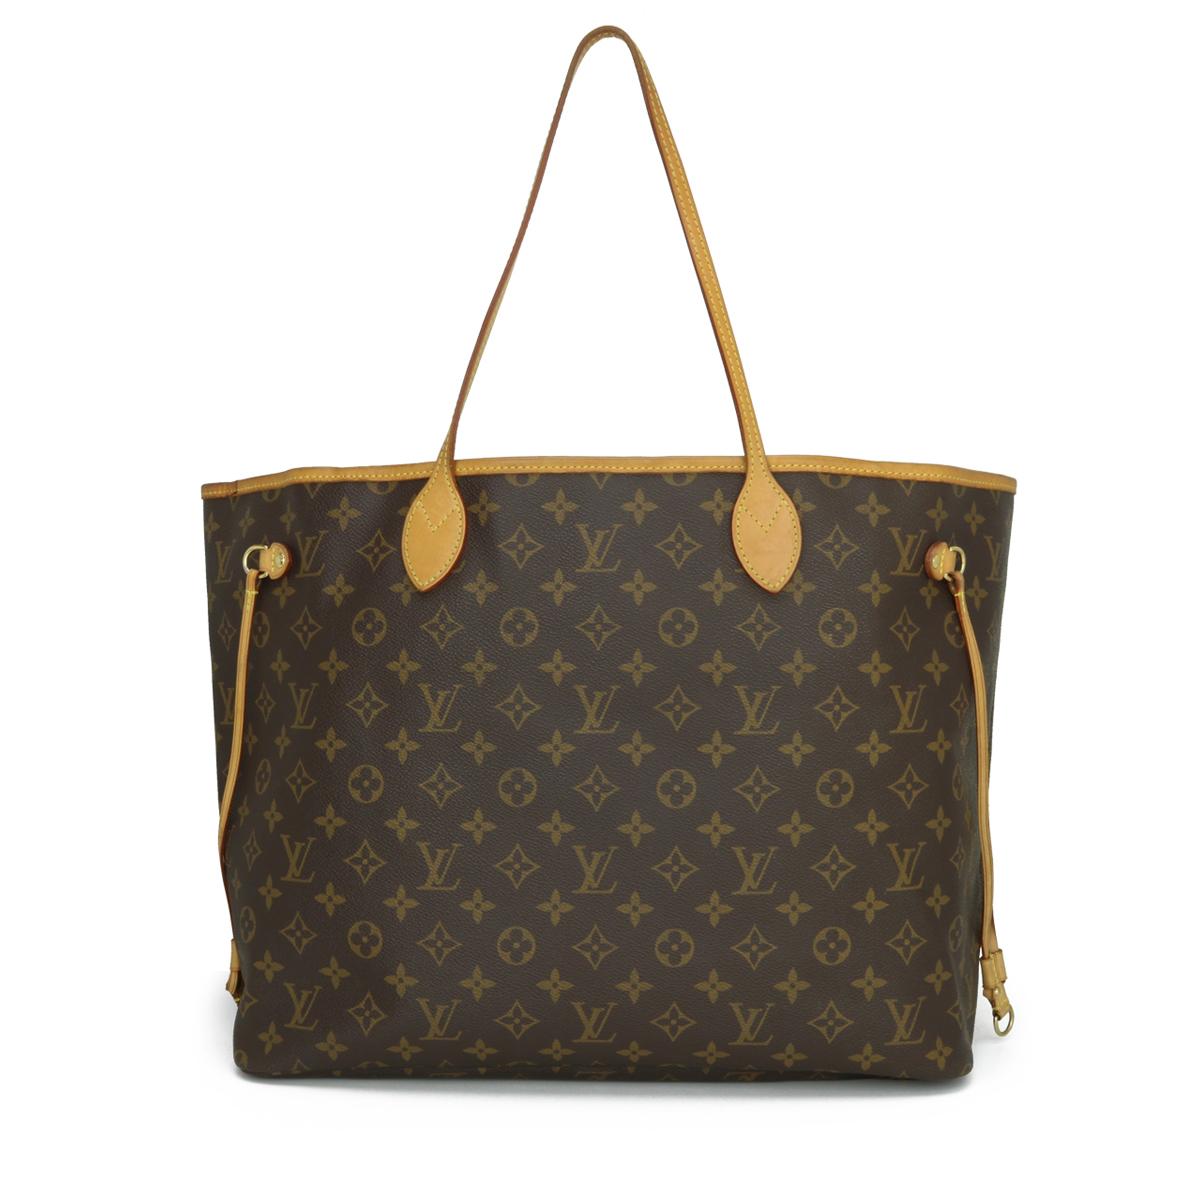 Louis Vuitton Neverfull GM in Monogram with Beige Interior 2008.

This bag is in good condition. 

- Exterior Condition: Good condition. Light storage creases to the canvas. Rubbing to four base corners. General marking, darkening and leather wear